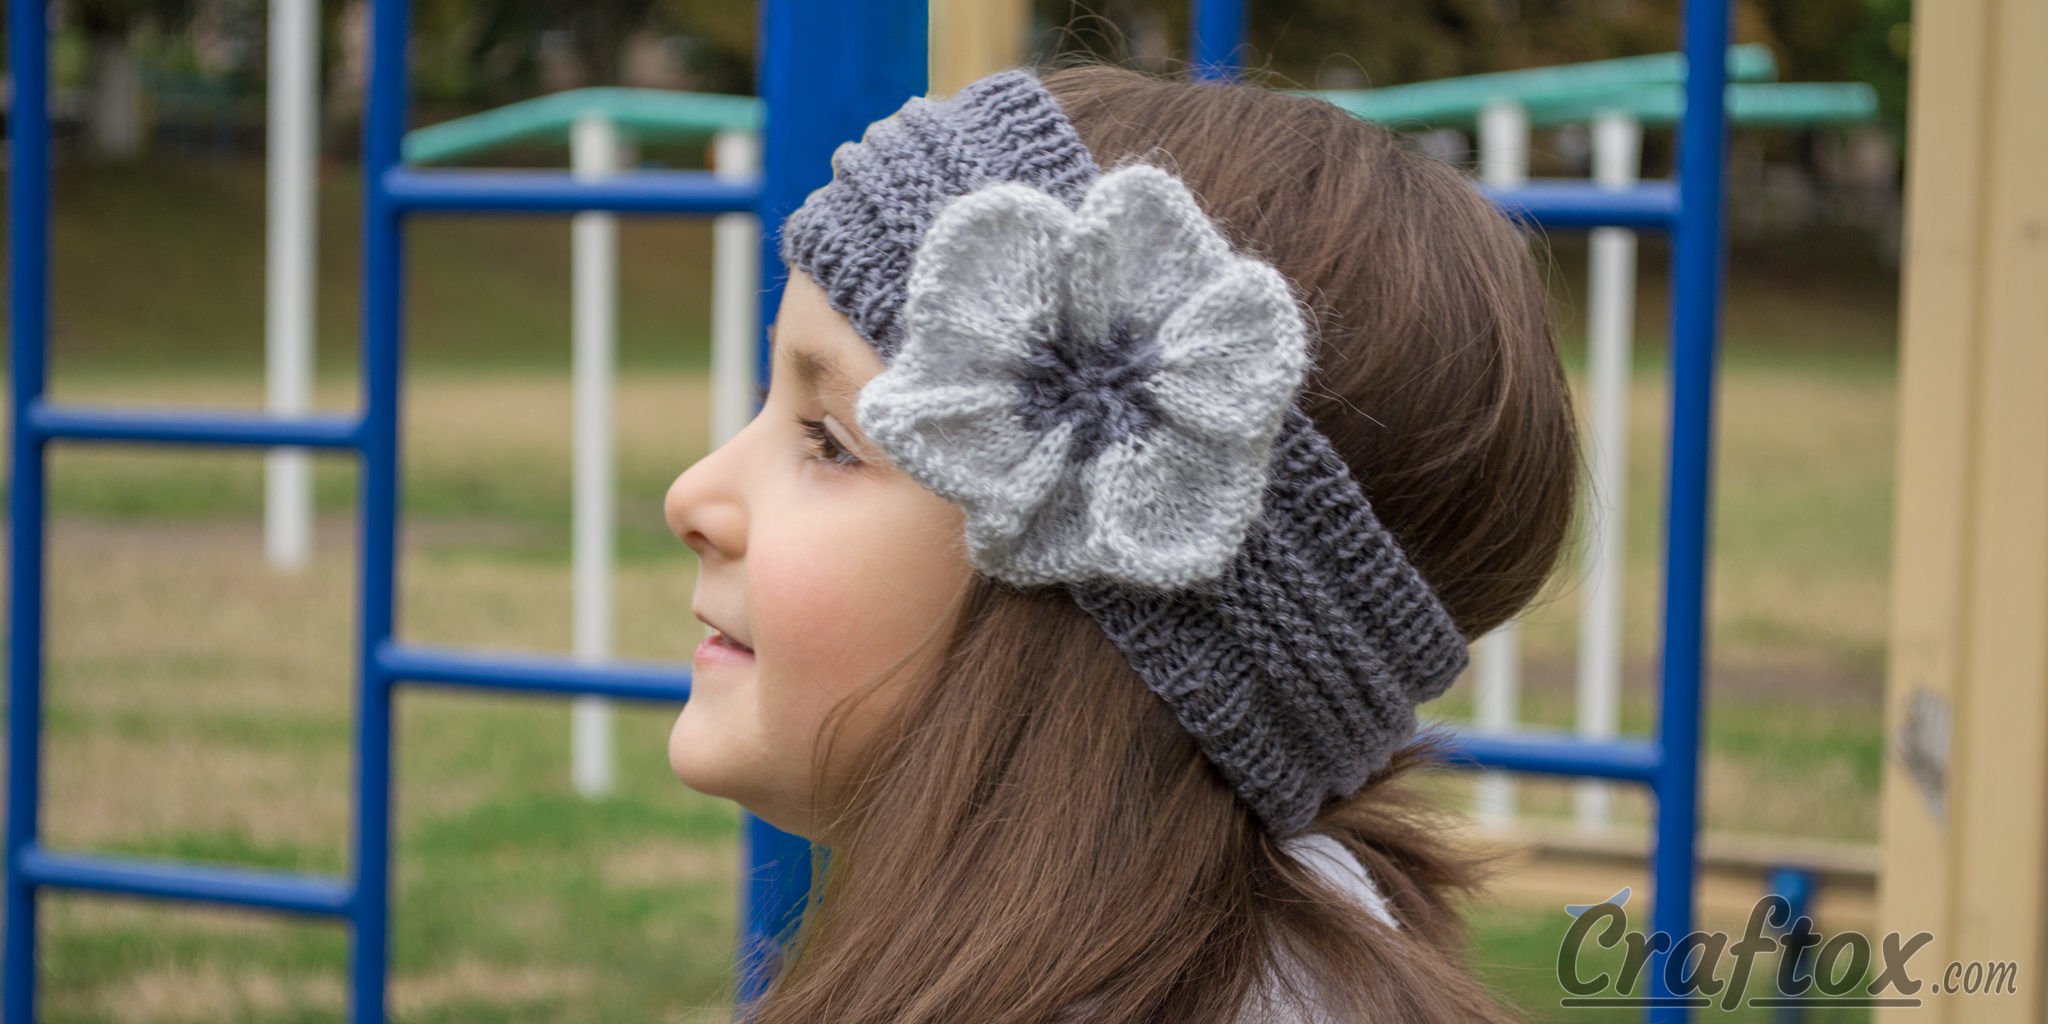 Knitted headband with flower (cropped)